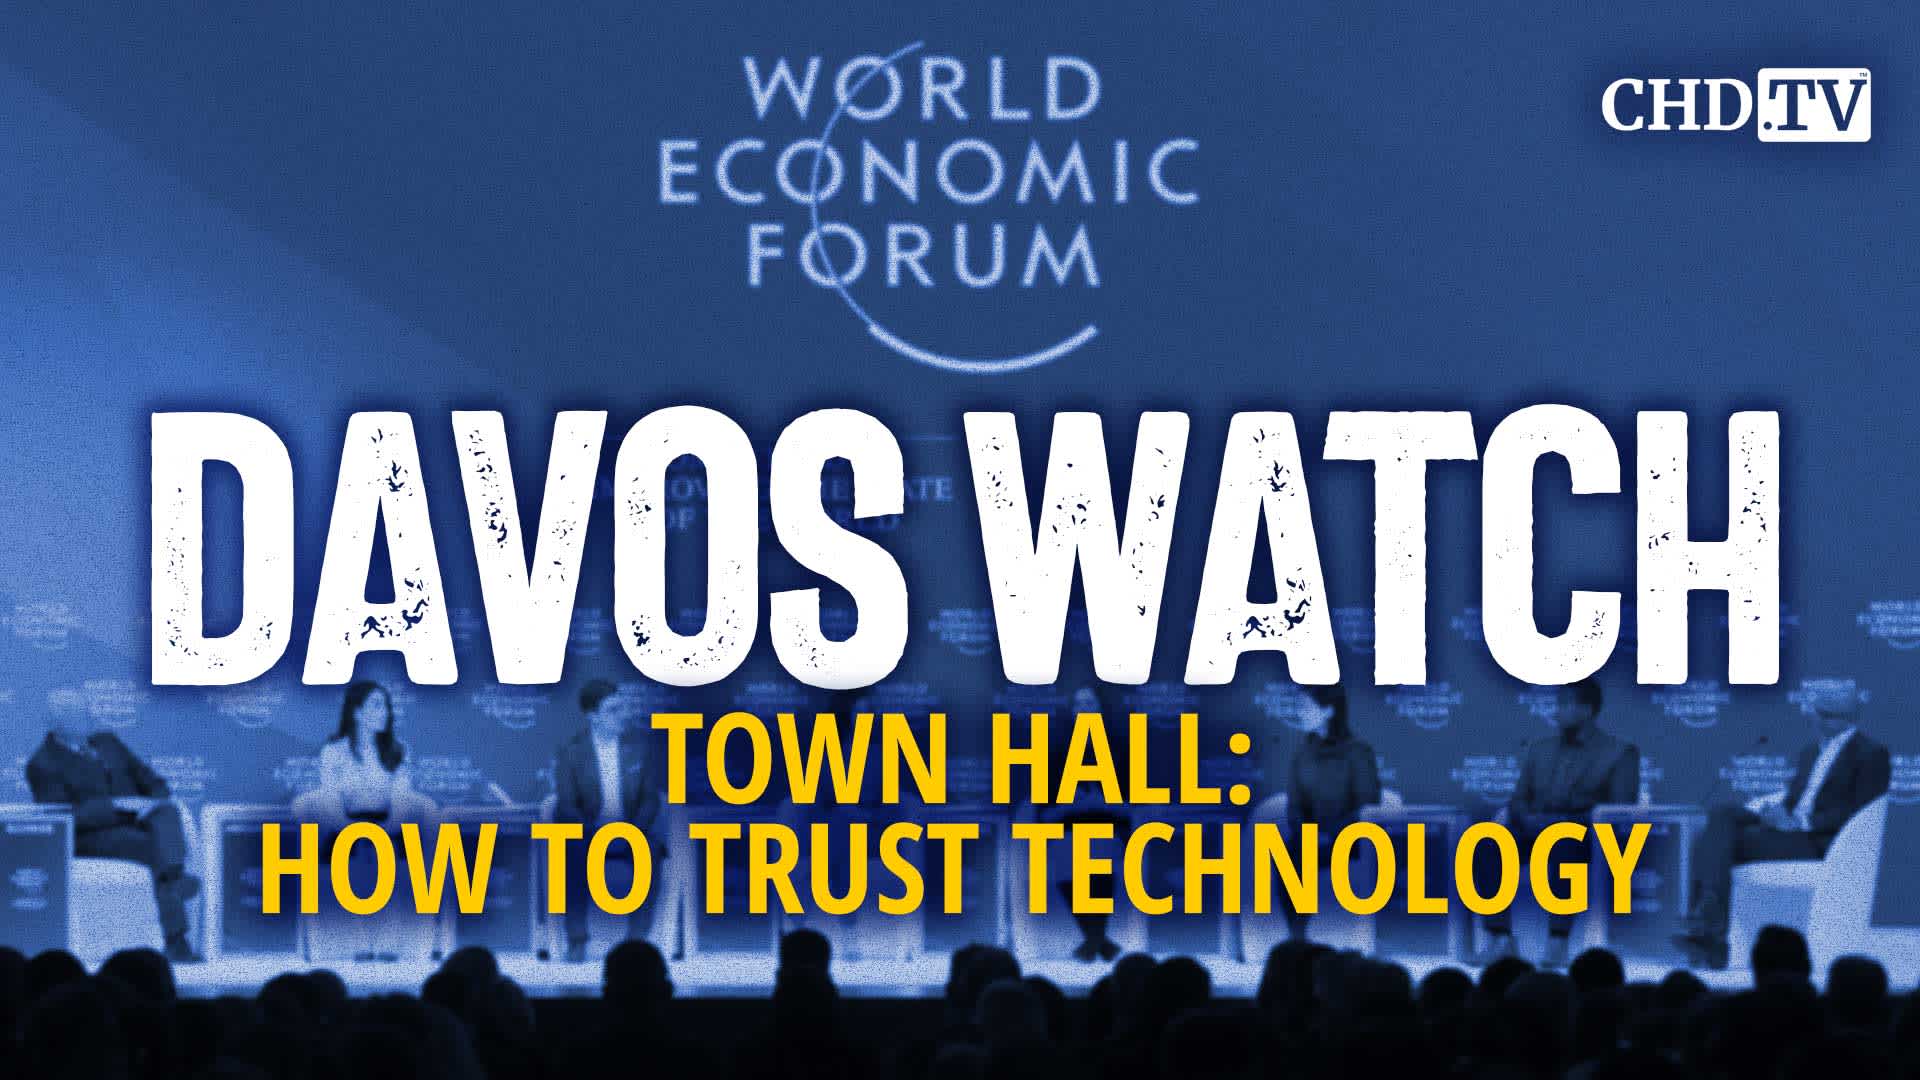 Town Hall: How to Trust Technology | Davos Watch